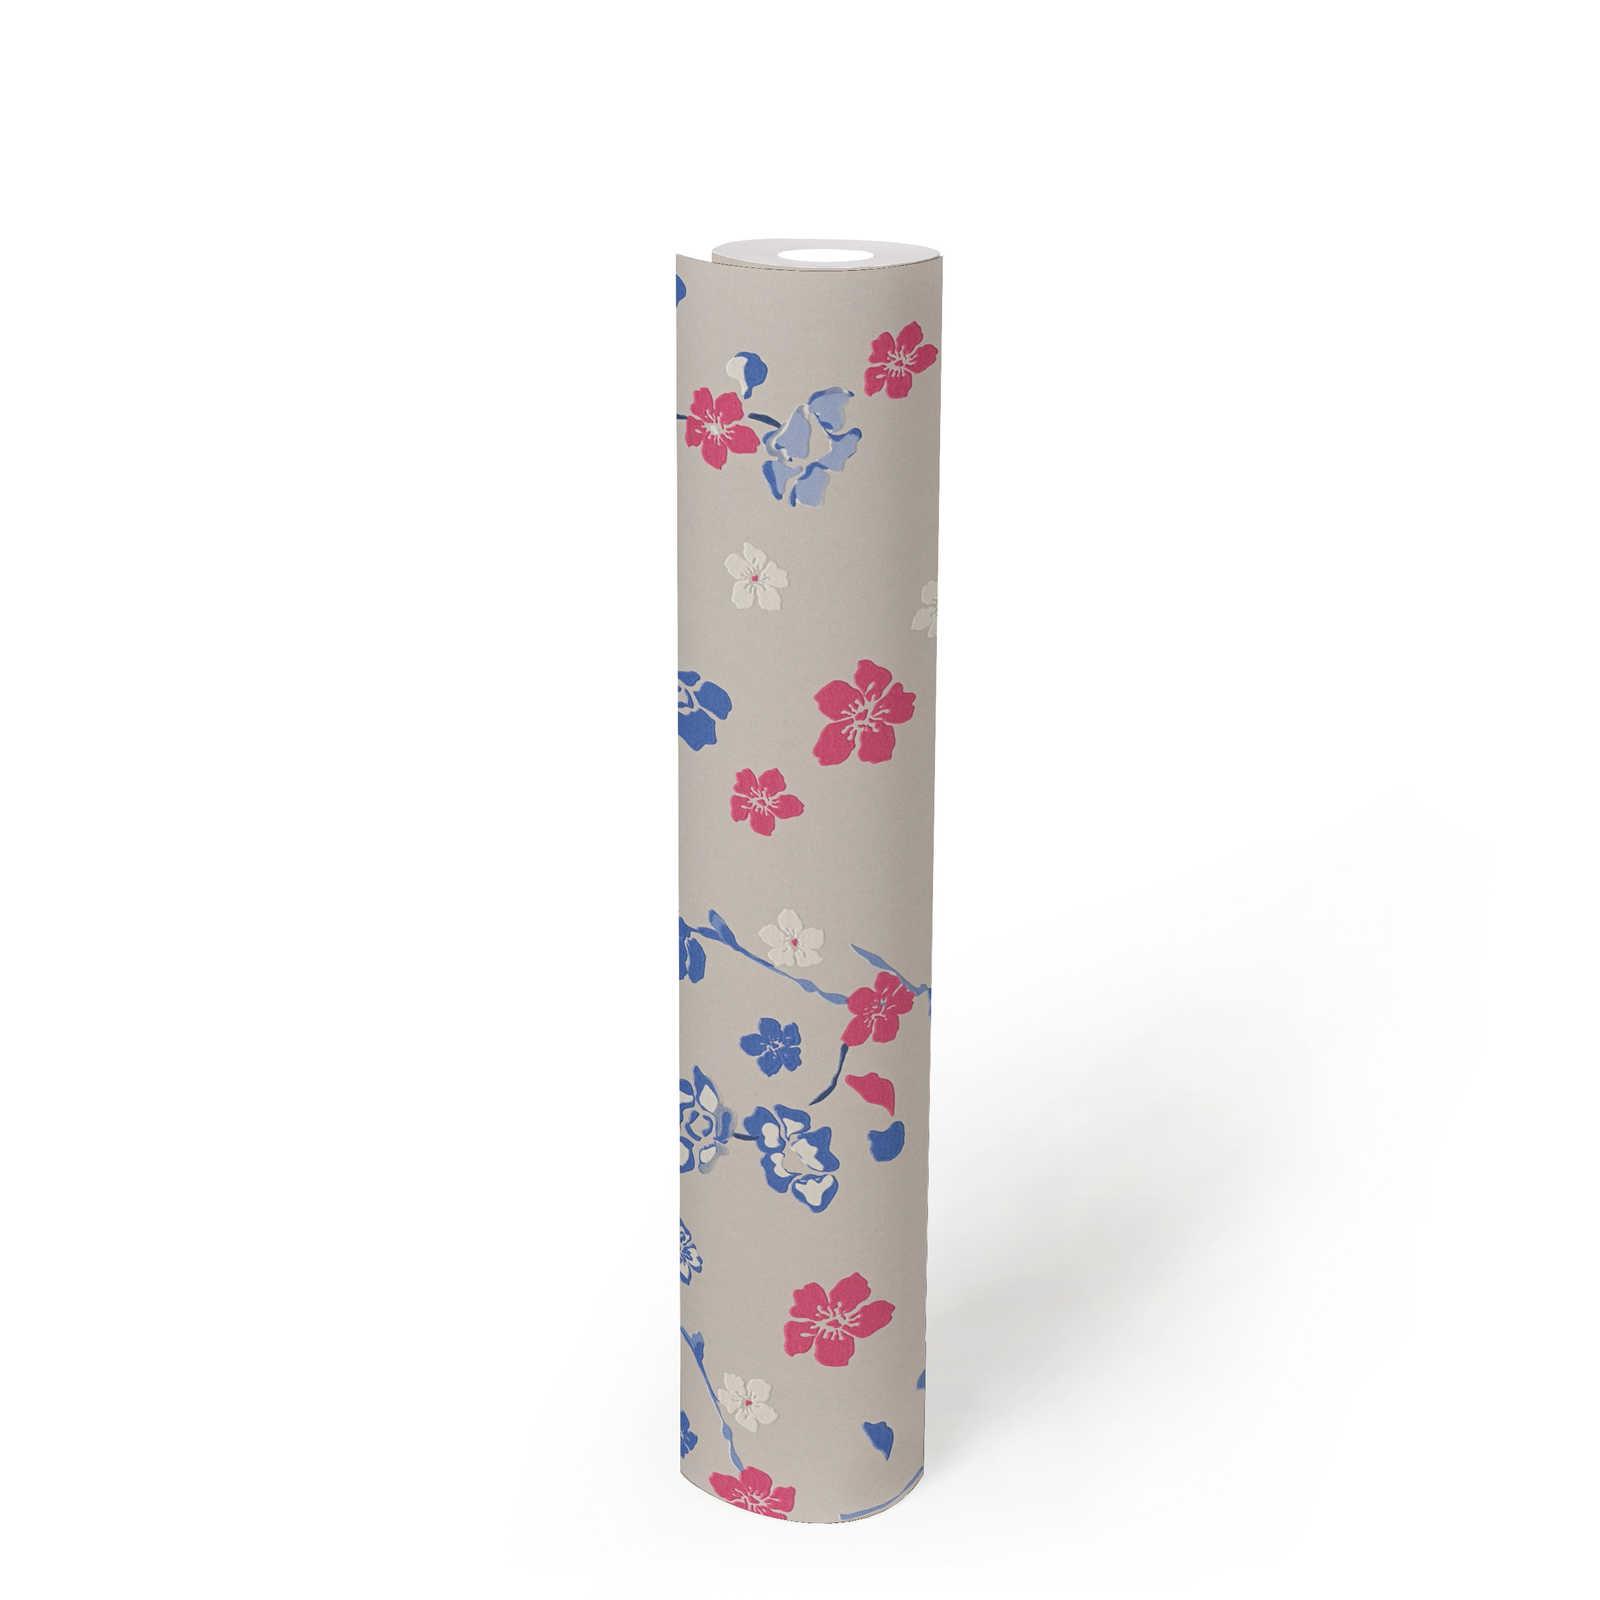             Non-woven wallpaper with playful floral pattern - light grey, blue, pink
        